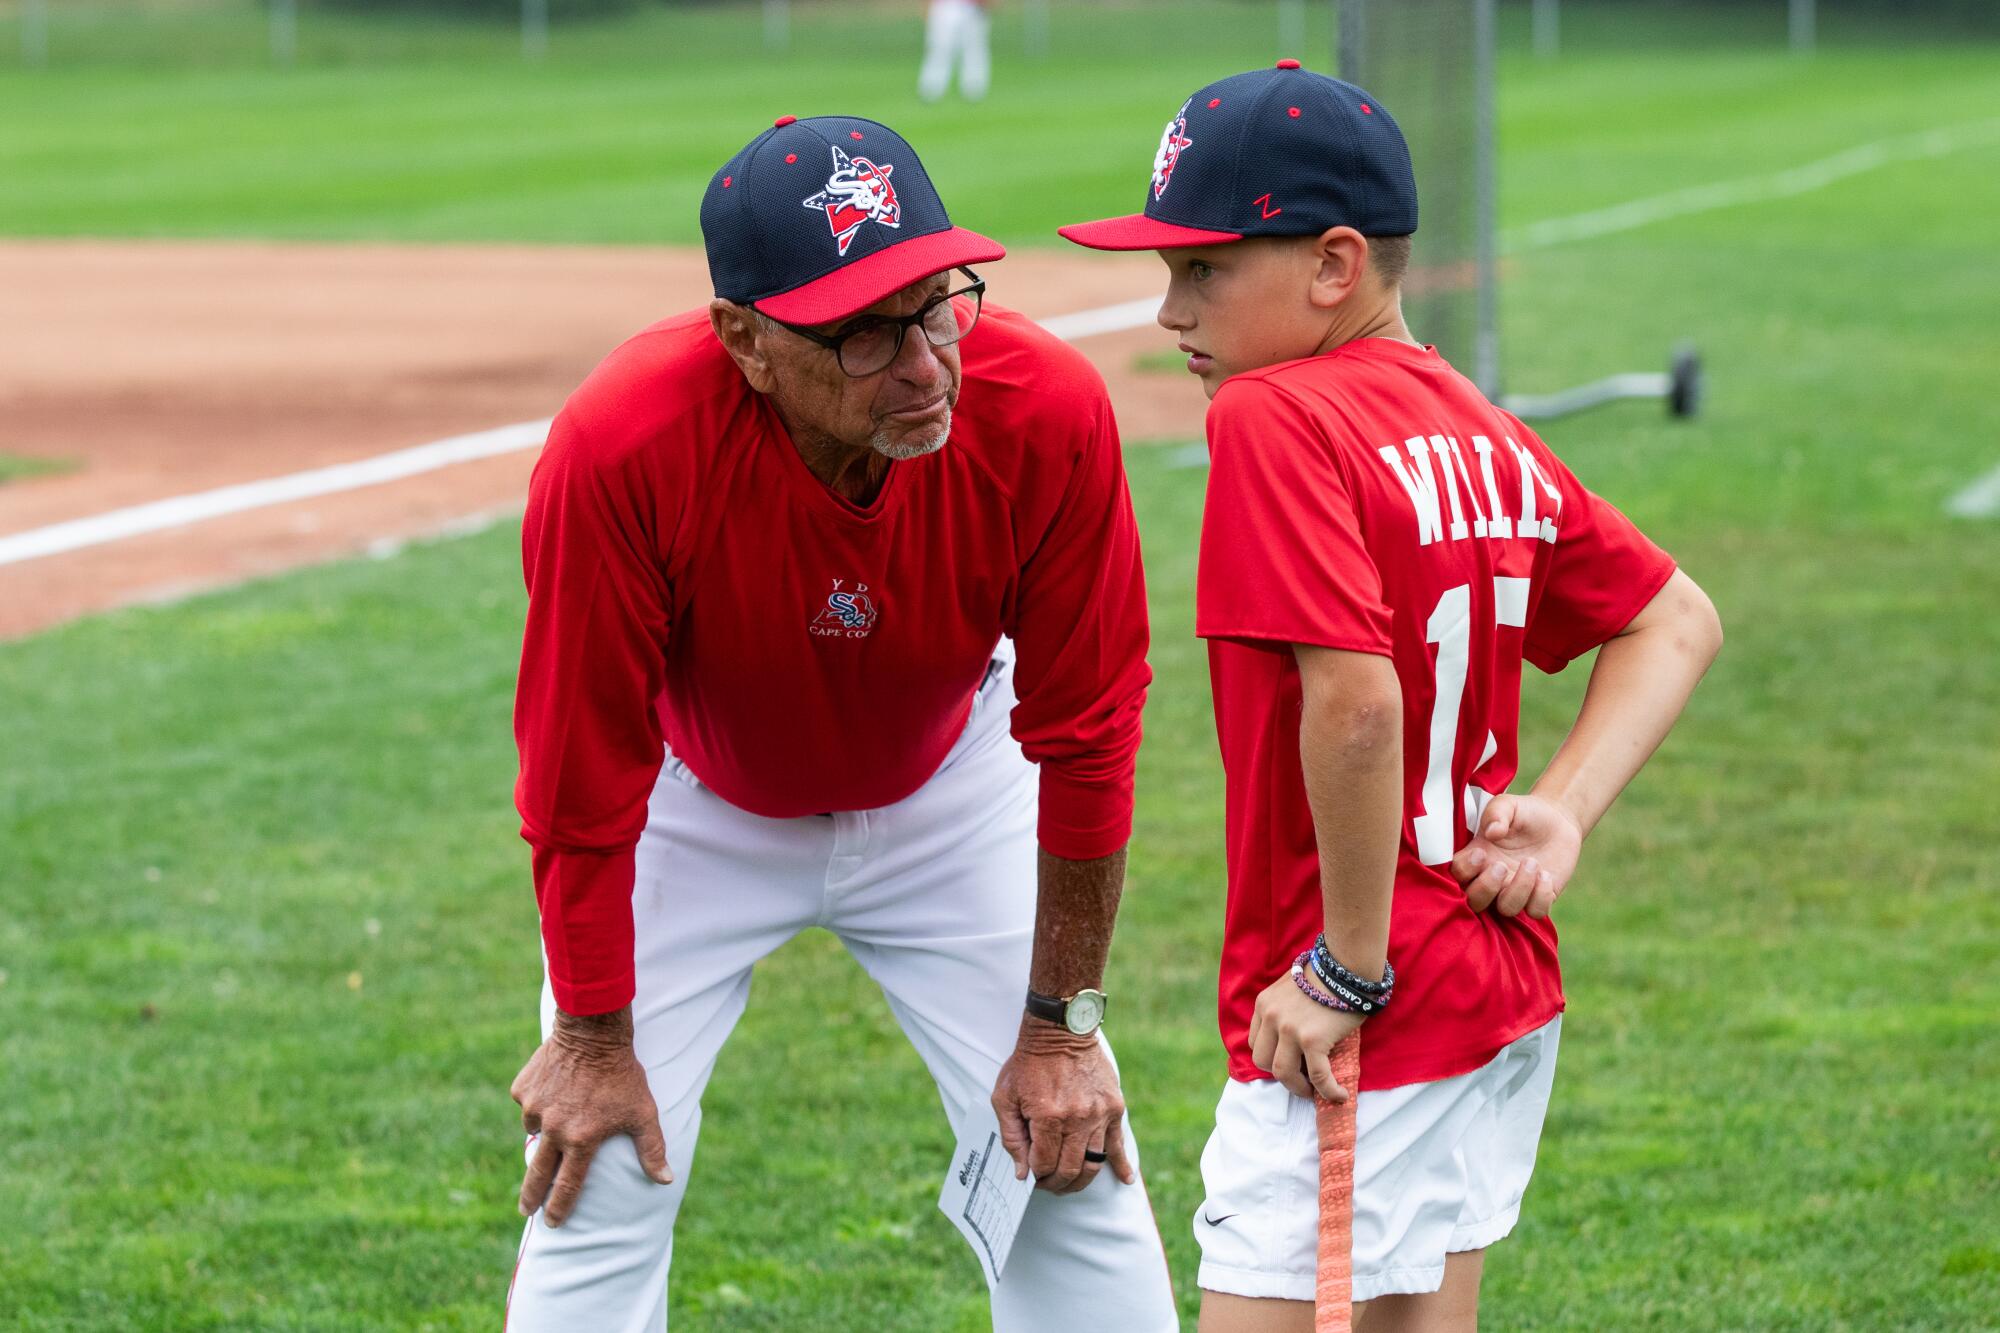 Coach Scott Pickler, left, speaks to a young baseball player.